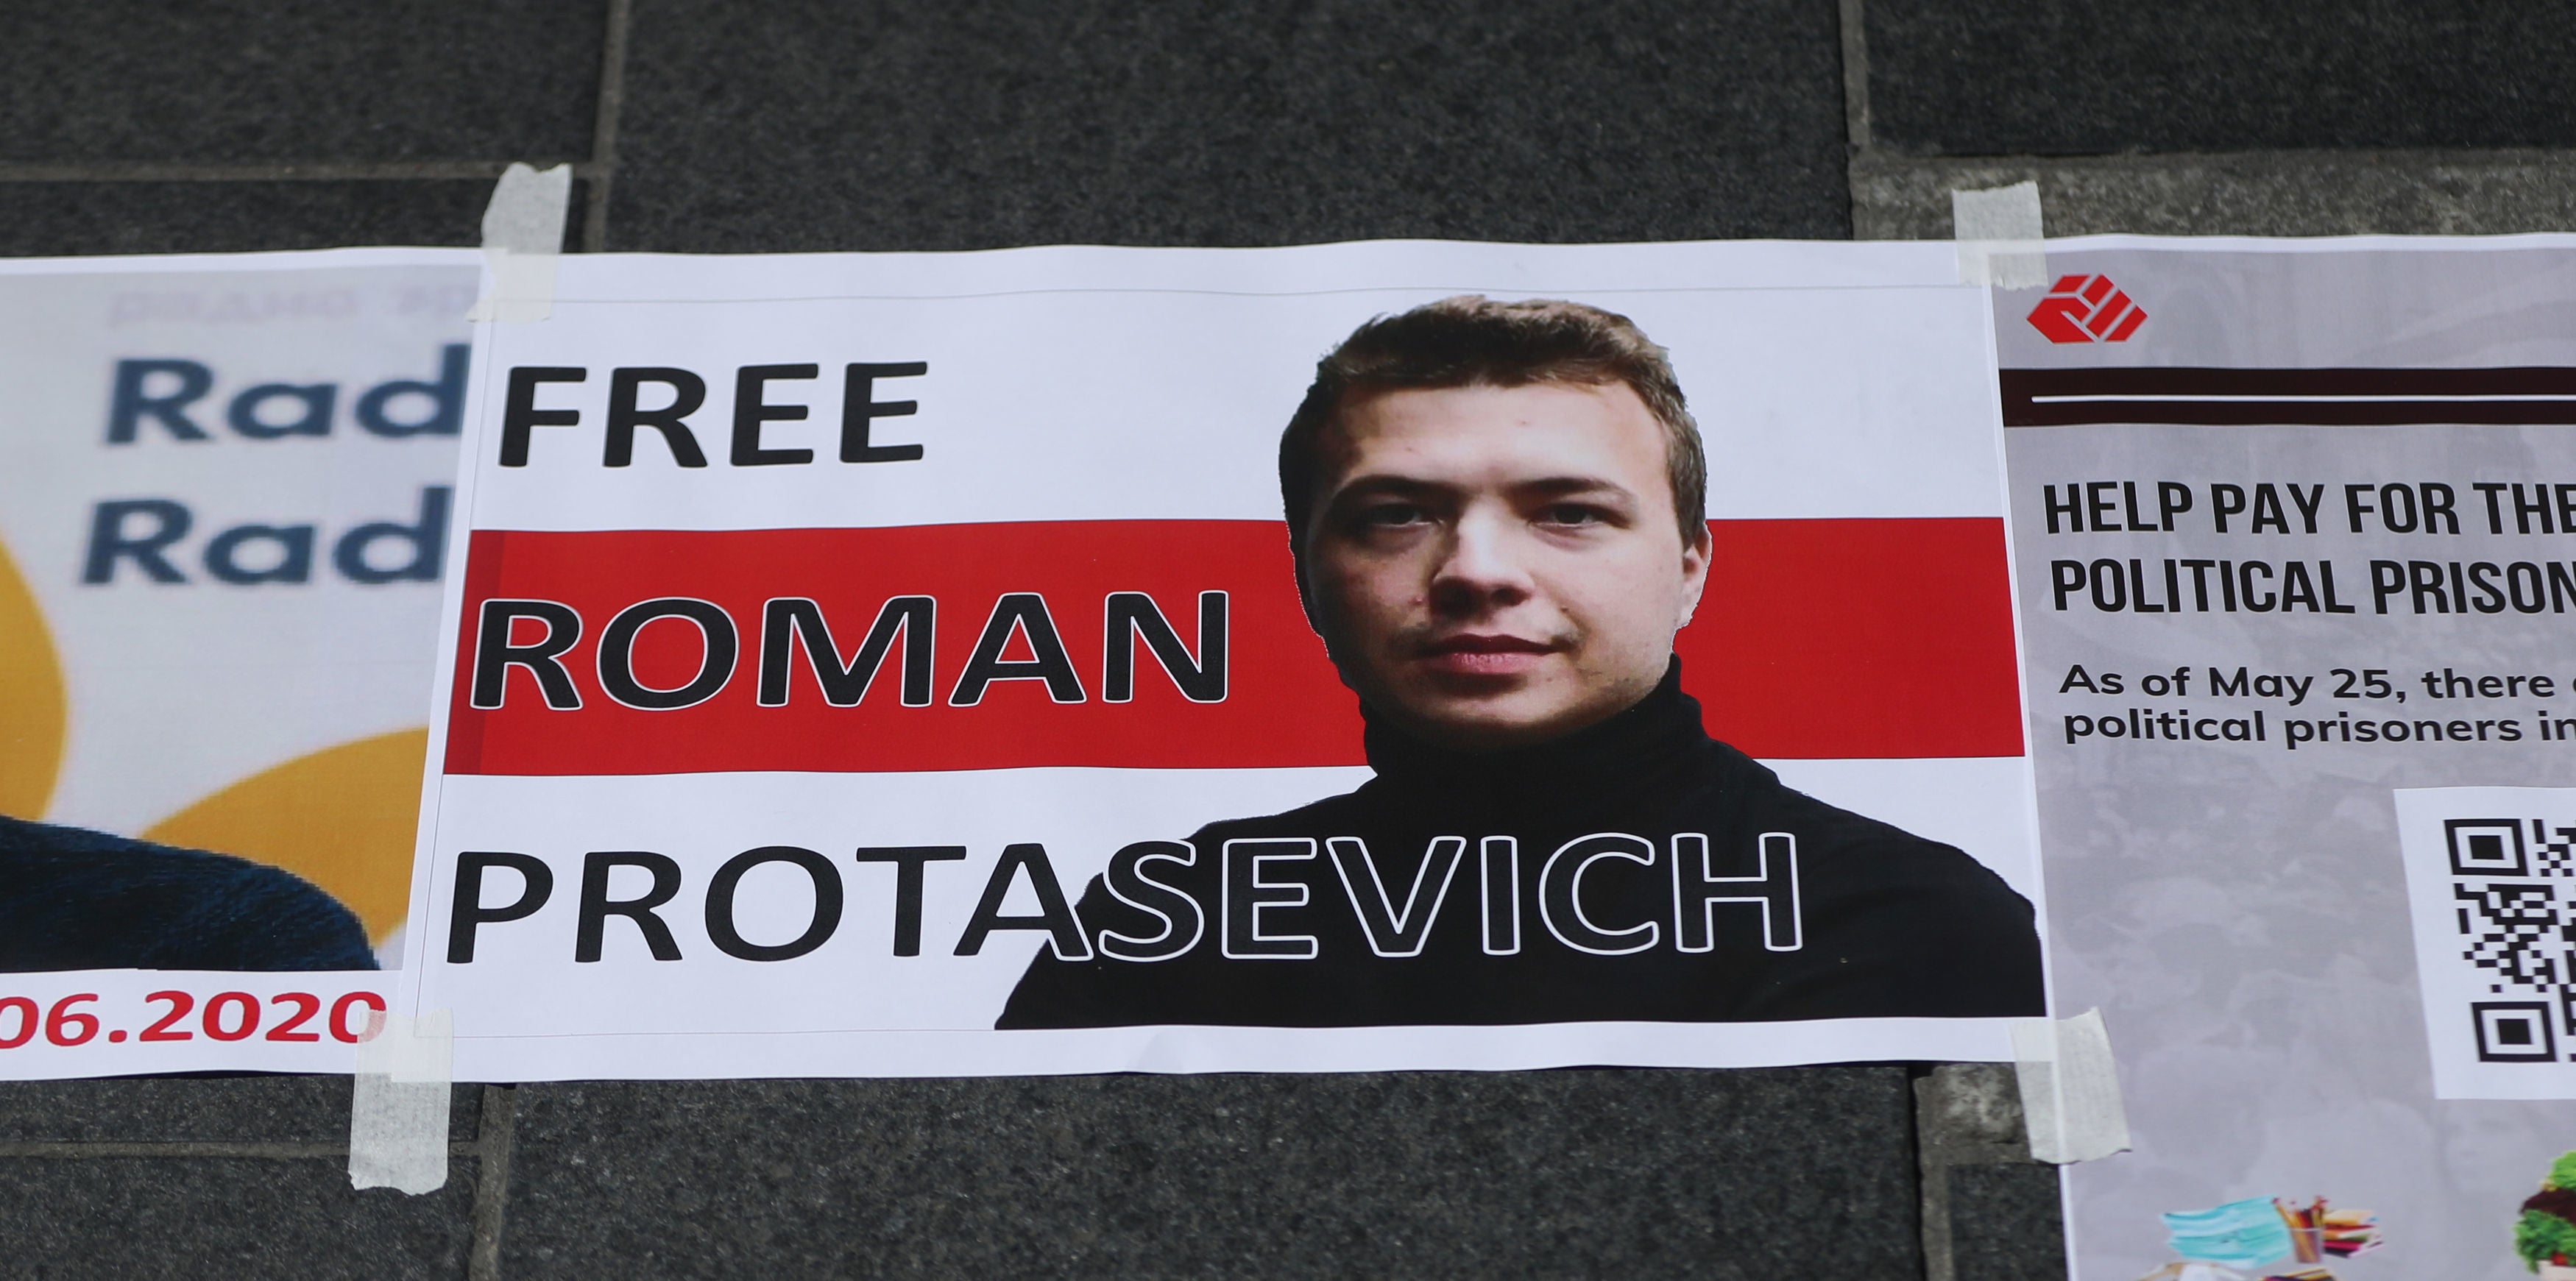 A poster calling for the release of Roman Protasevich